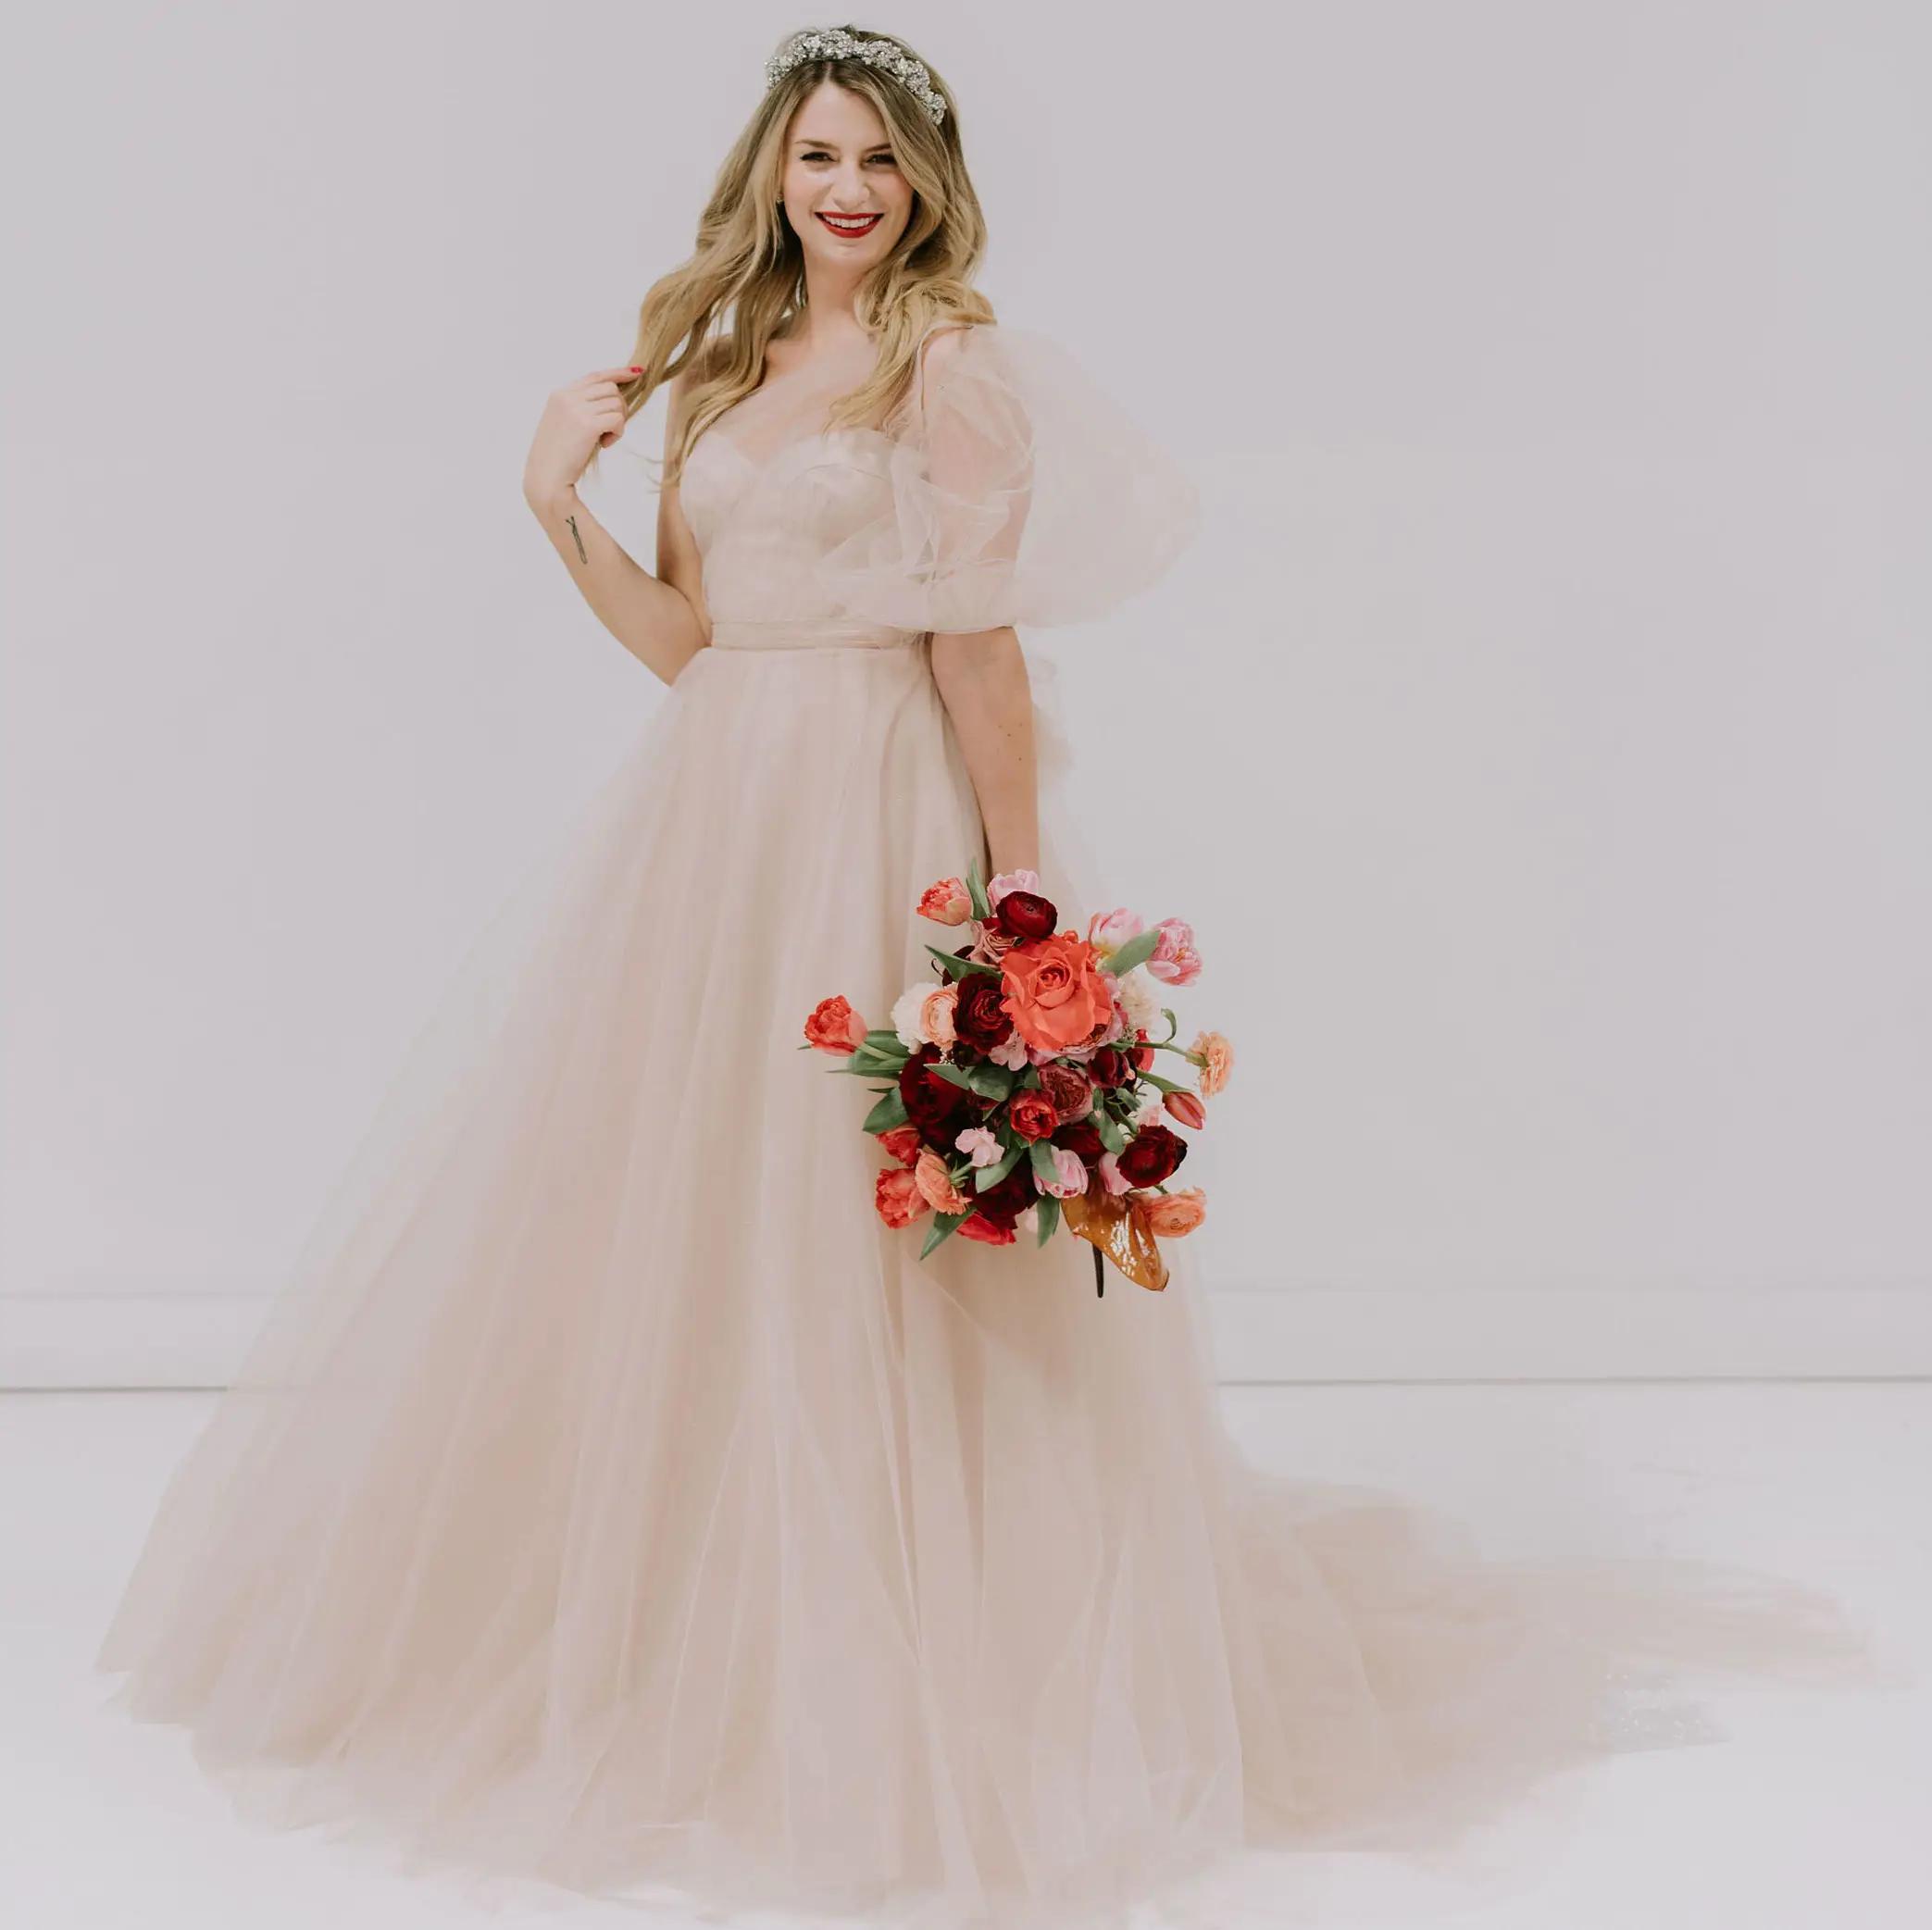 Styled Shoot: Valentine's Day, Taylor's Version